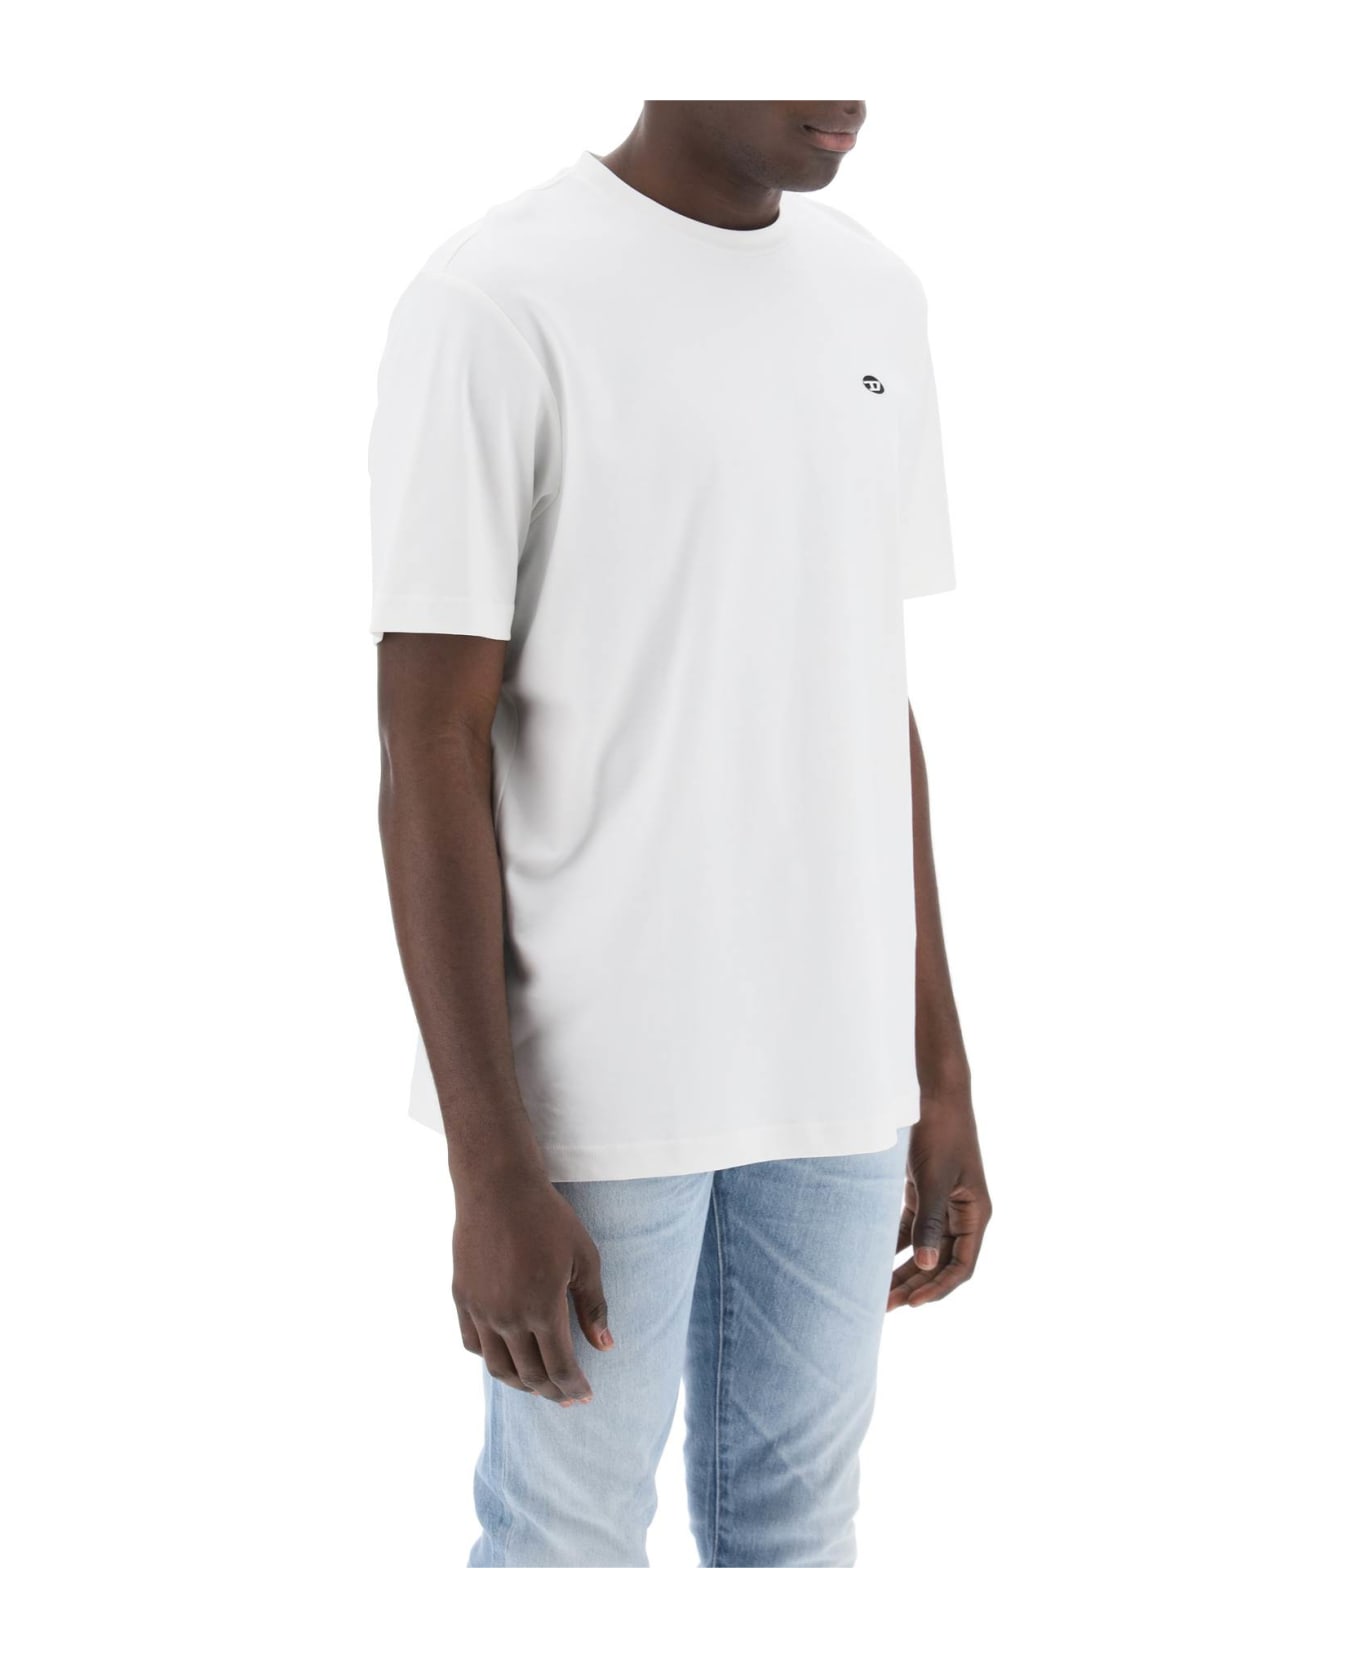 Diesel 't-just-doval-pj' T-shirt - Off/white